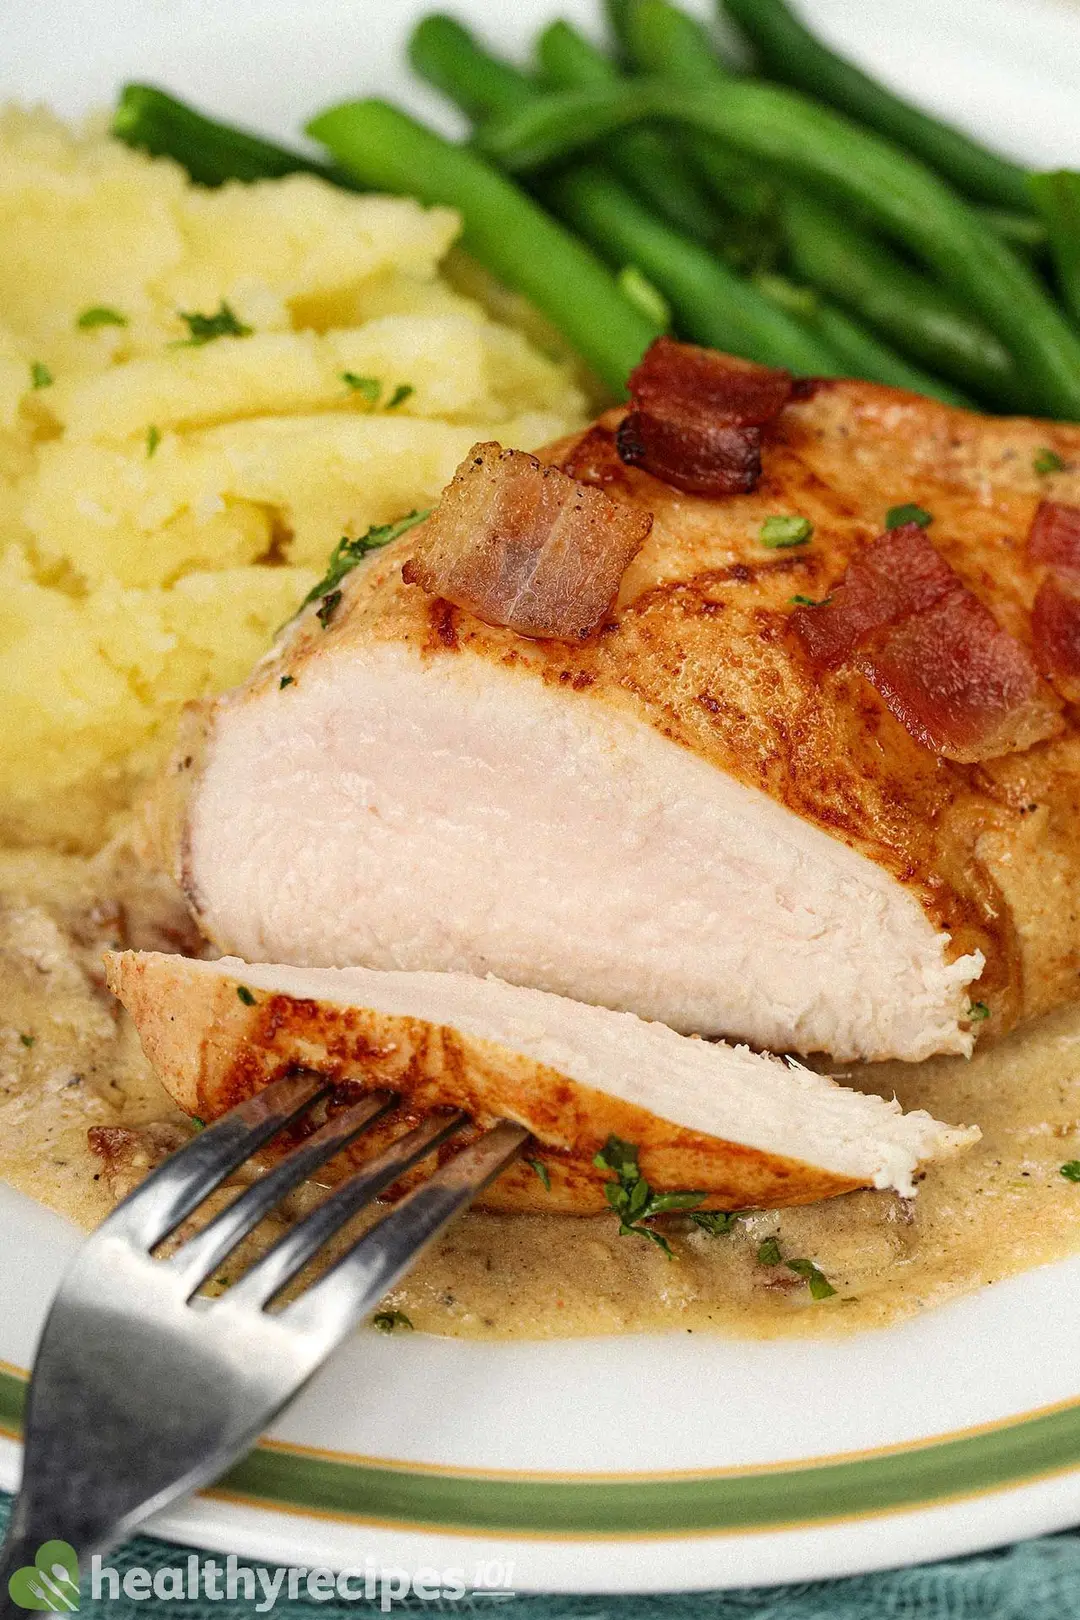 A fork sticking into a piece of chicken with another large piece of chicken, mashed potatoes, bacon pieces, and green beans in the background